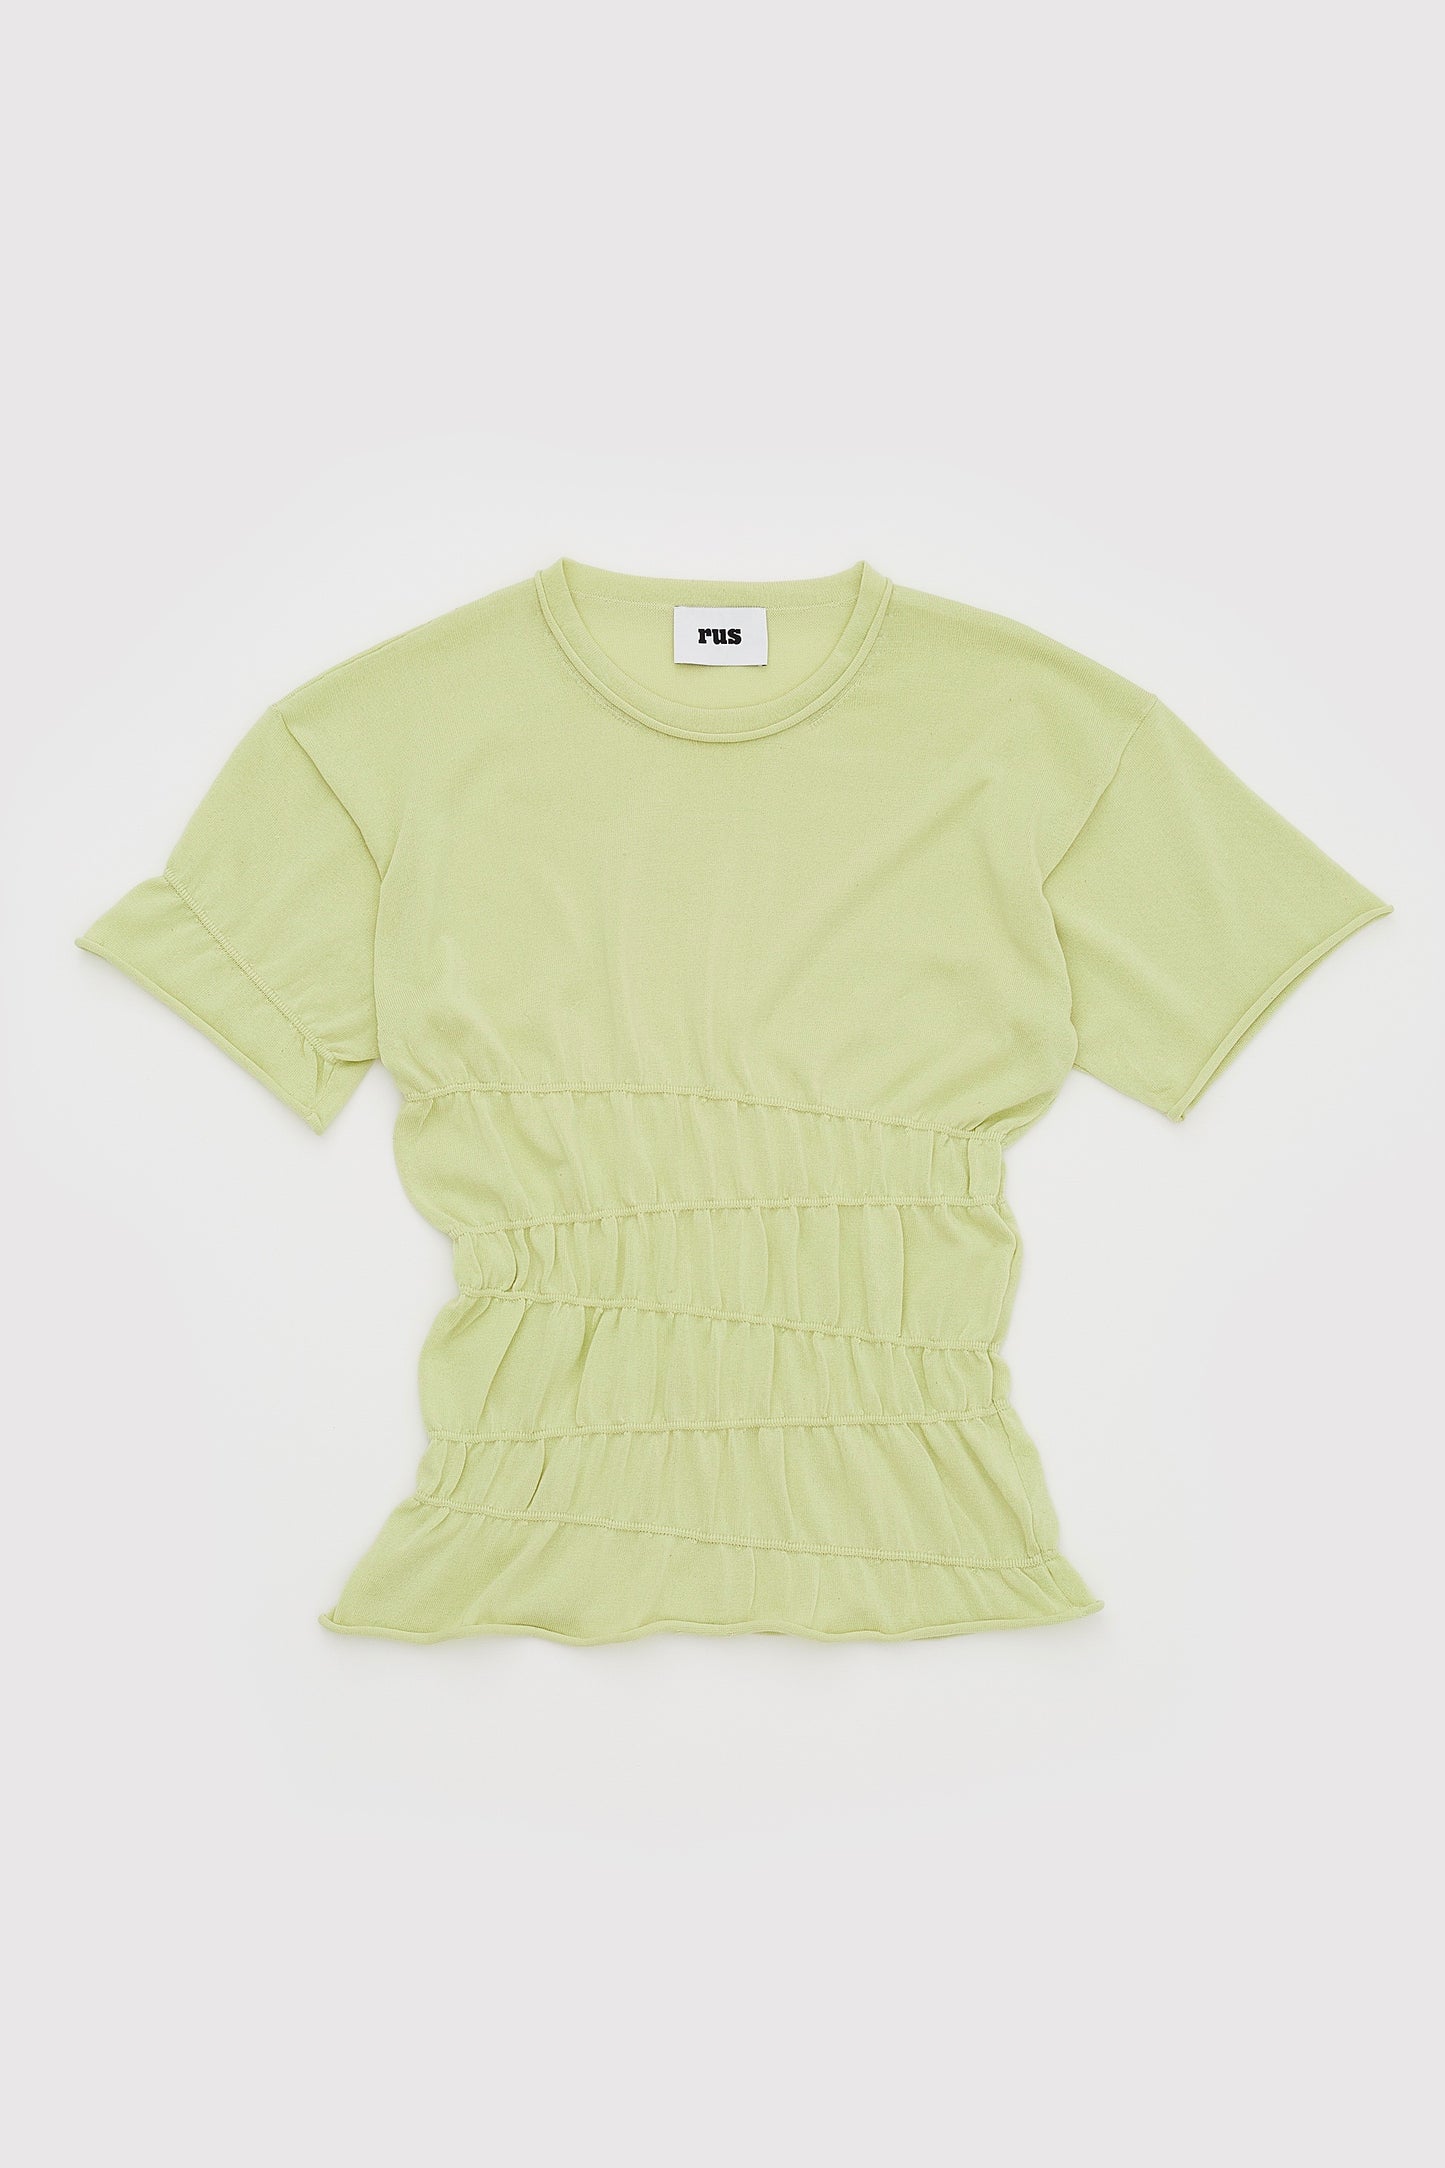 Rus - Chizu Top: Lime Zest